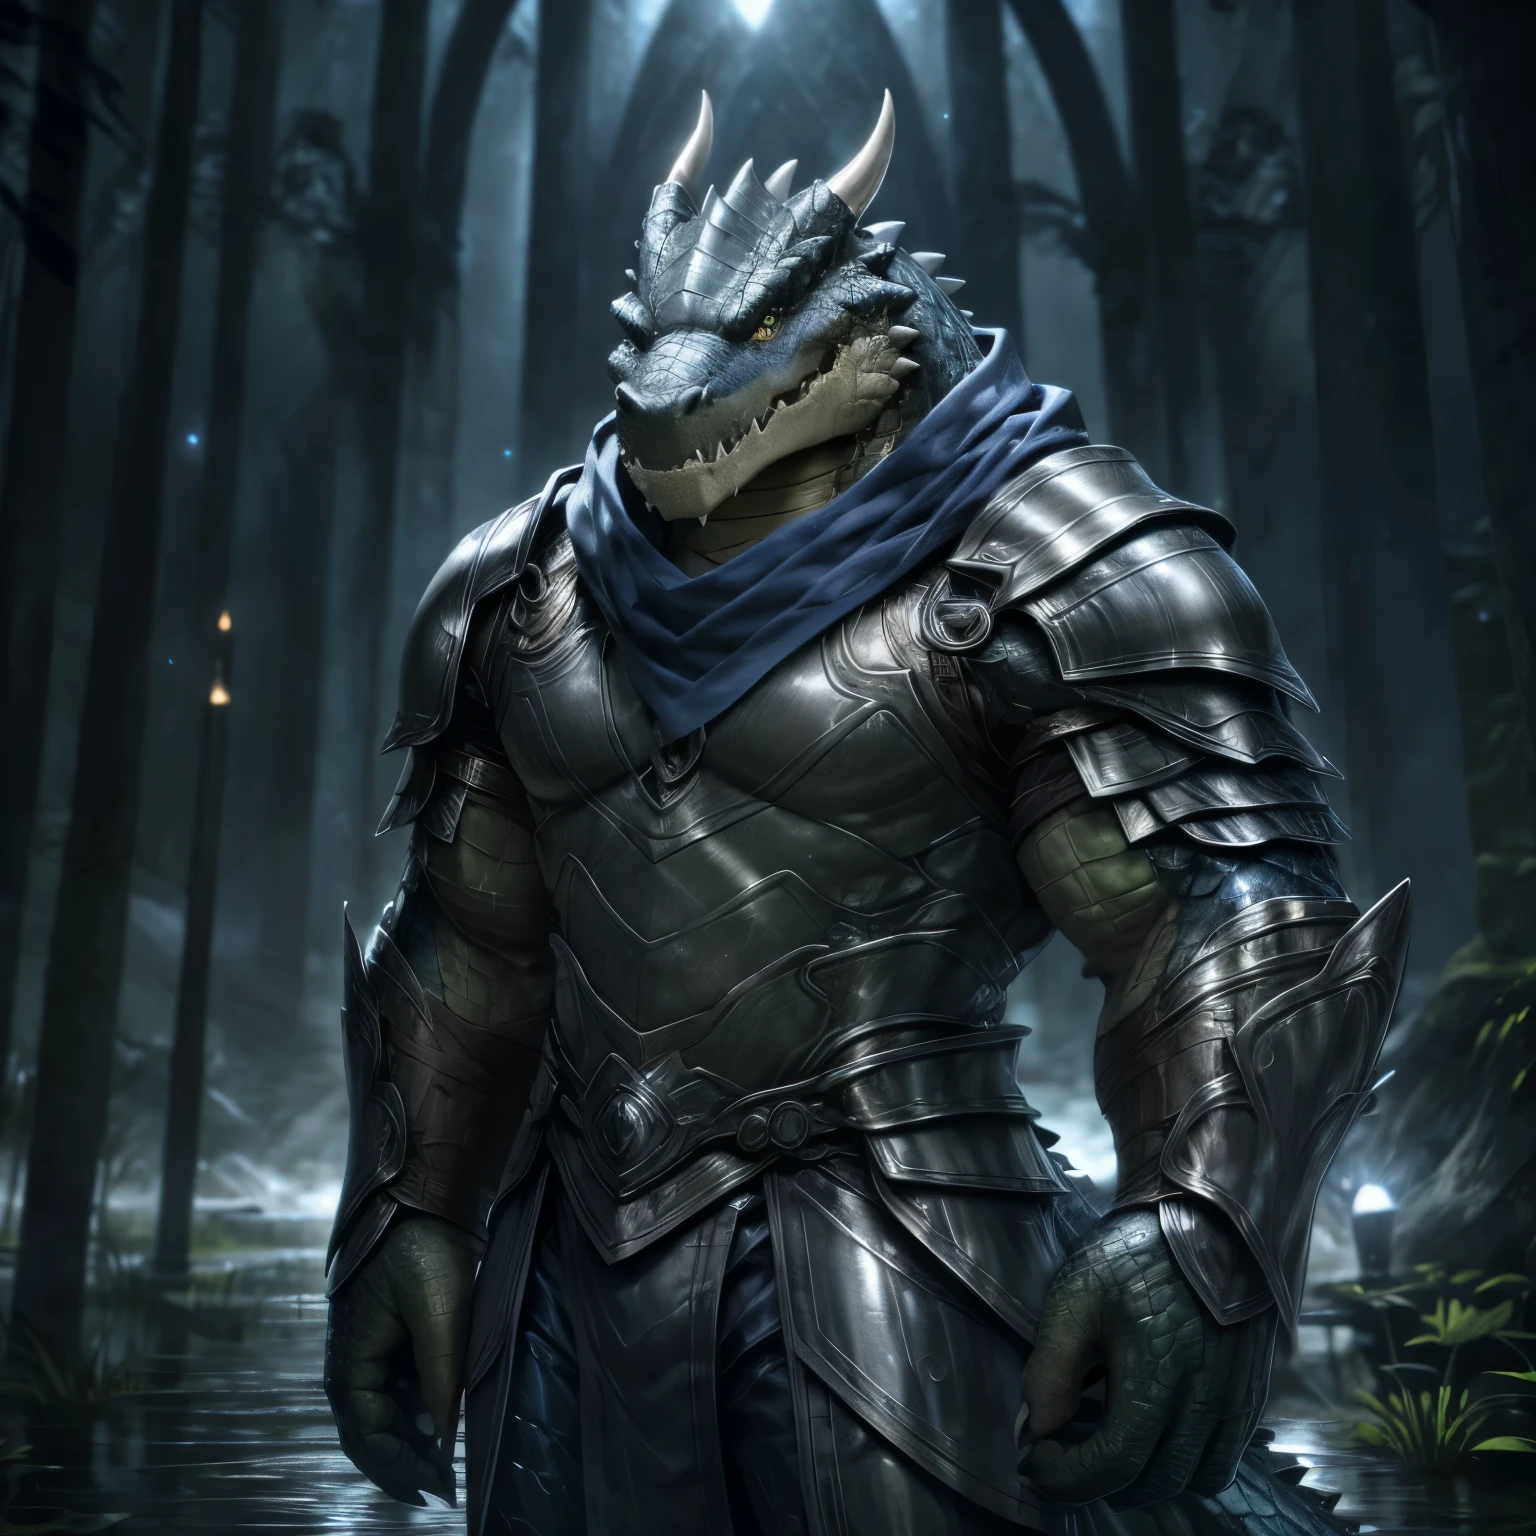 Tall Hyper Muscular Deep BLUE Crocodile wearing Full silver armor in all body, HD, 4K, high resolution, Best quality, perfect colors, perfect shadow, perfect litthing, Alone, Males person, Correct Head Anatomy, Correct Anatomy, (Detailed Realistic scales, epic, tmasterpiece:1.2), (Detailed swamp background), shining Scales, smooth scales, perfect scales, detailed scales, Crocodile wearing a silver full armor, blue pants, Black shirt, Detailed silver armor, perfect pants,Persian scarf, Deep Blue Crocodile, torch lighting, night, Silver armor covering The entire chest, Silver armor arms, Deep blue scales color, hornless, no horns, Big muscle